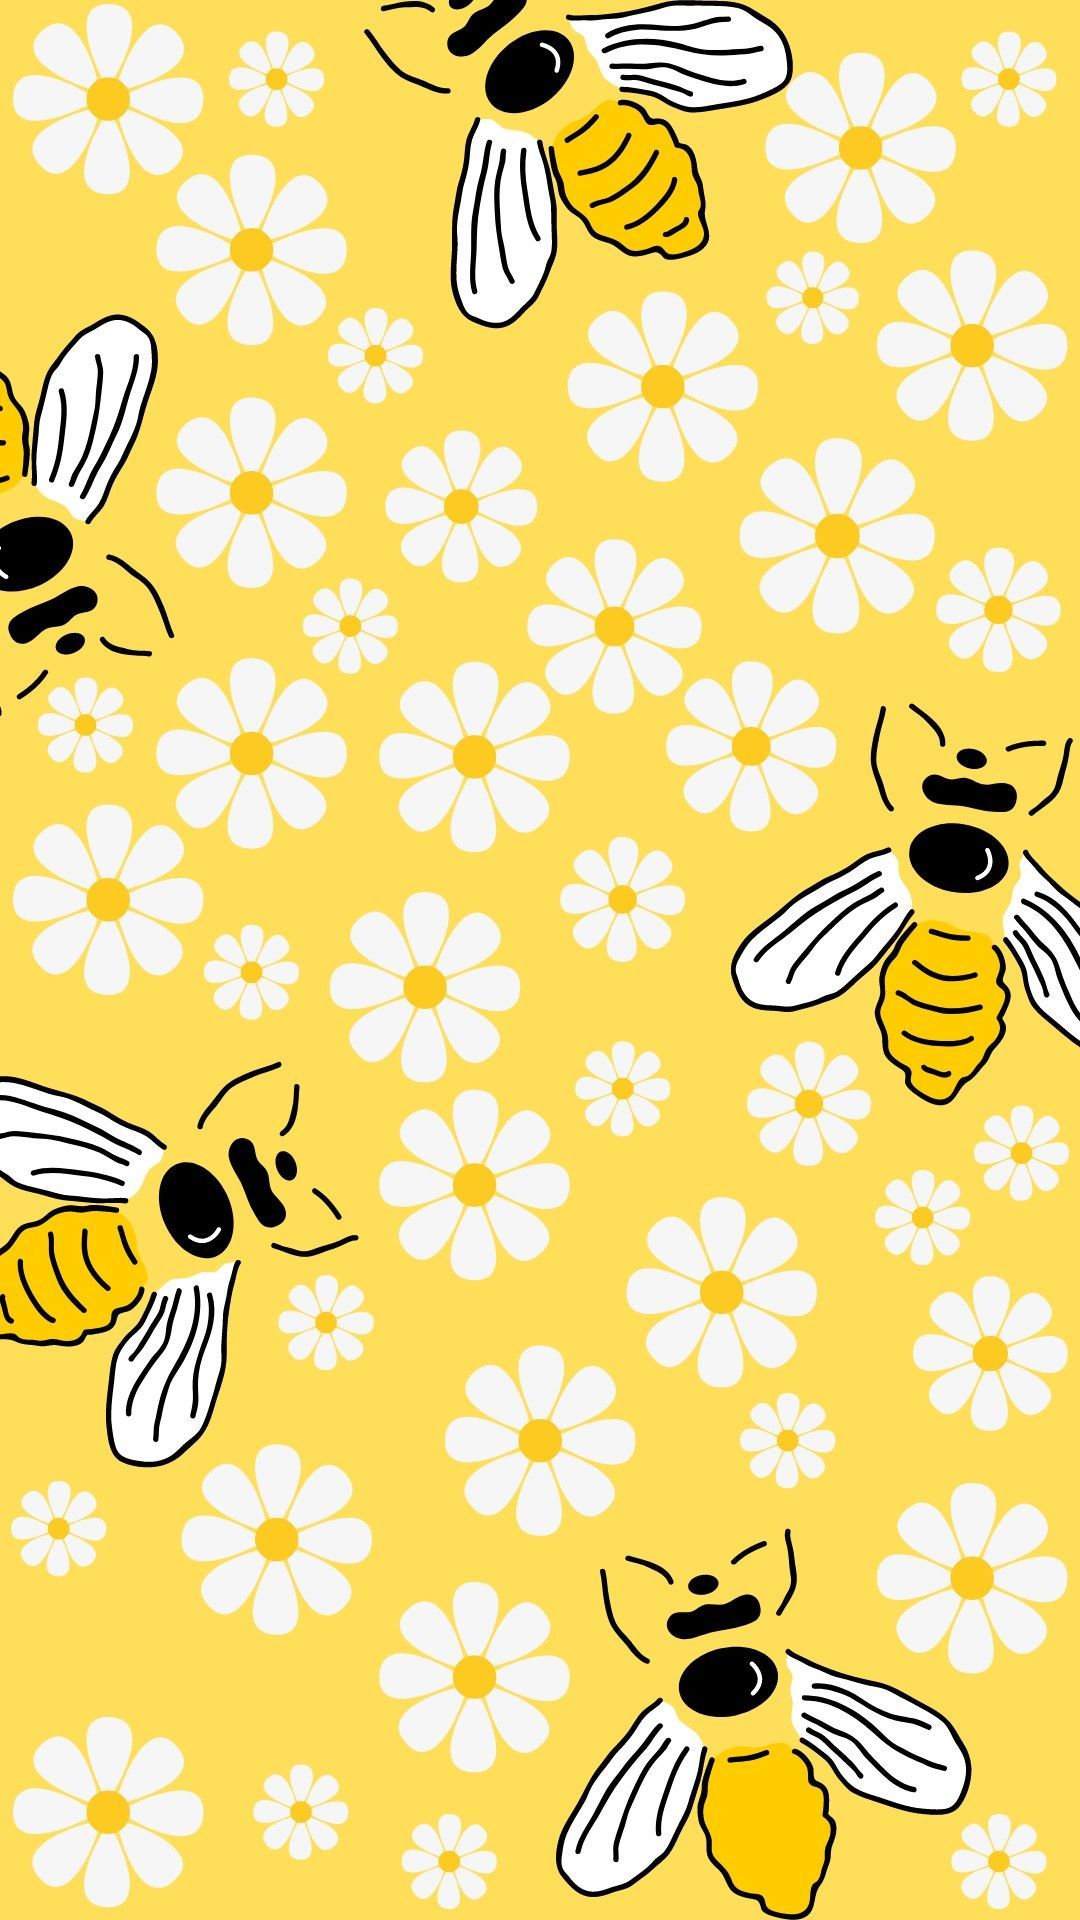 Yellow aesthetic wallpaper with bees and flowers. - Bee